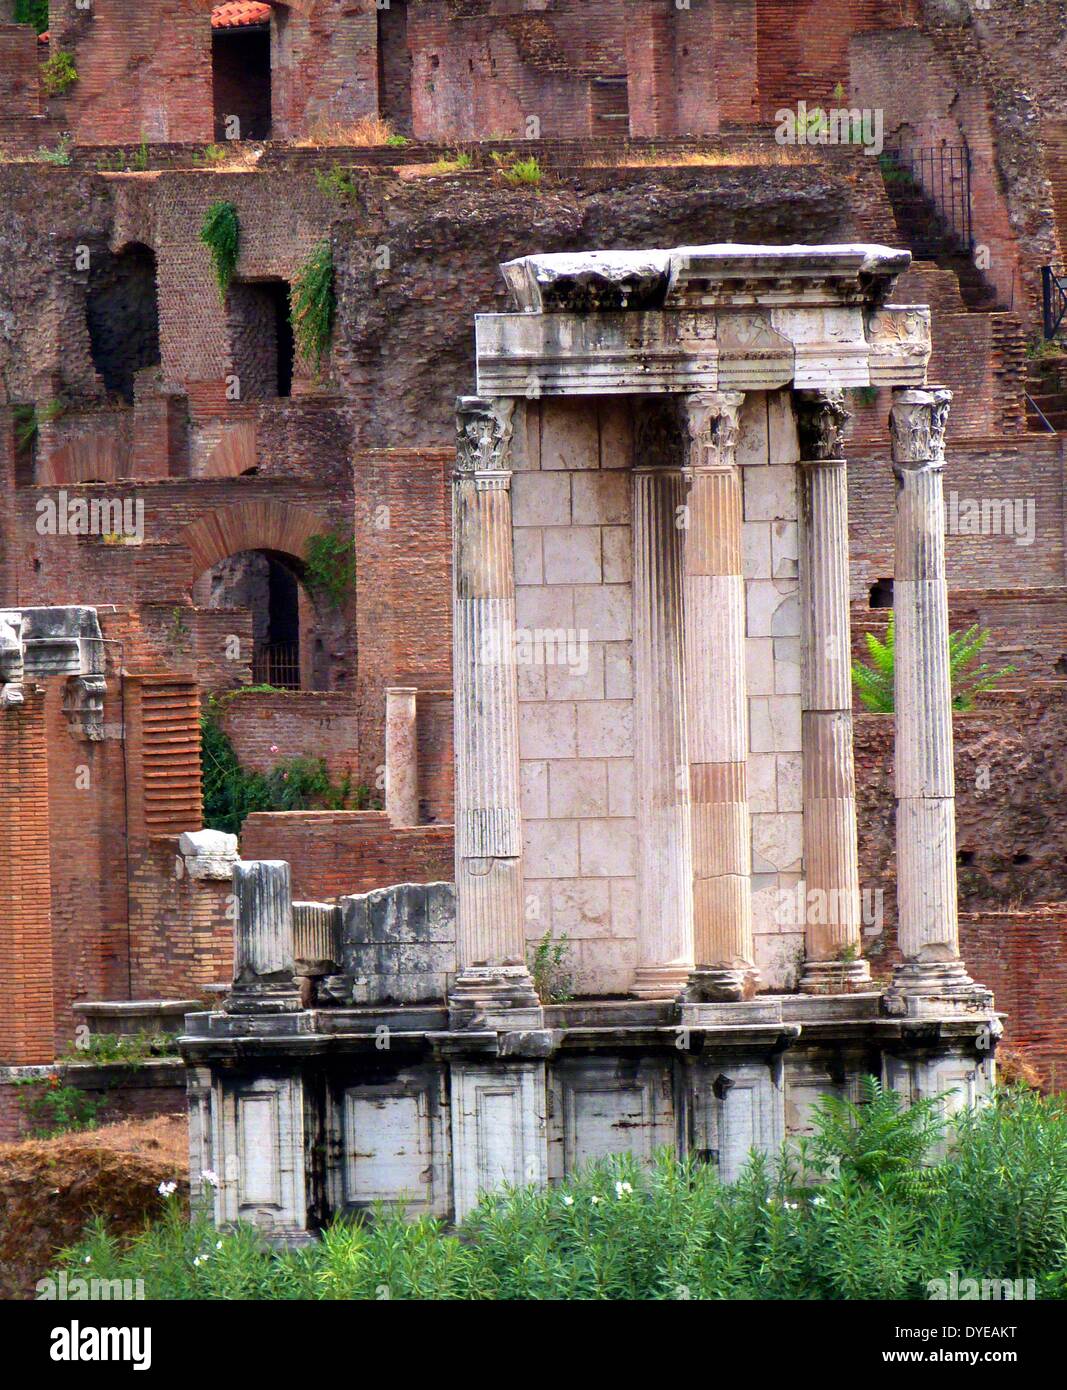 The Roman Forum is a rectangular plaza surrounded by the ruins of ancient government building in the centre of Rome. Originally referred to as a marketplace. Rome. Italy 2013 Stock Photo